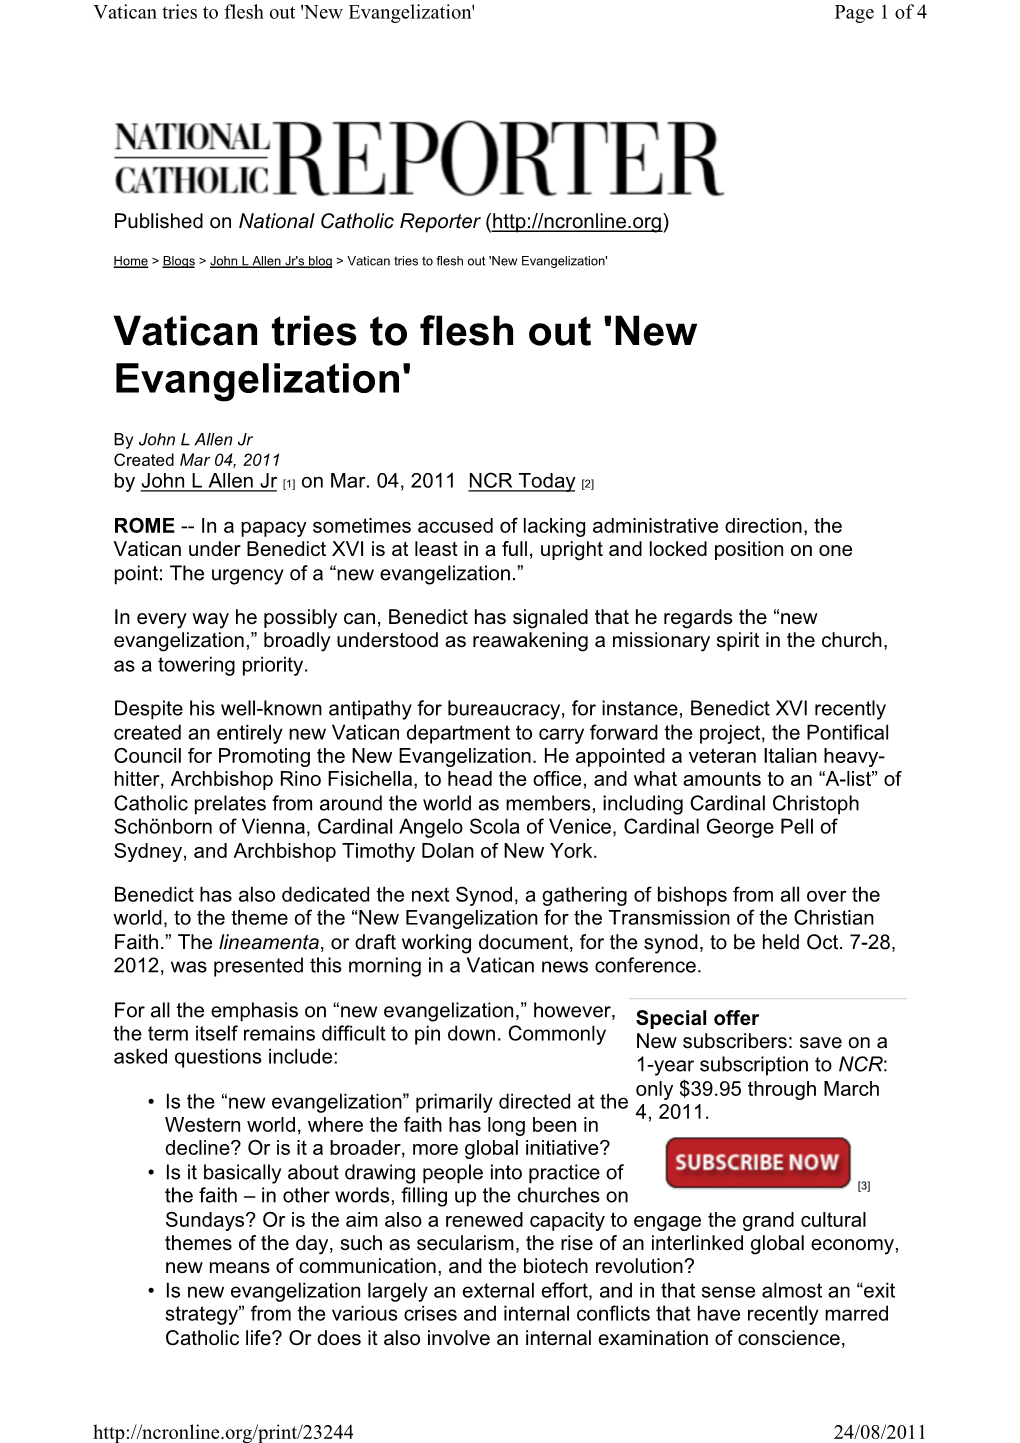 Vatican Tries to Flesh out 'New Evangelization' Page 1 of 4